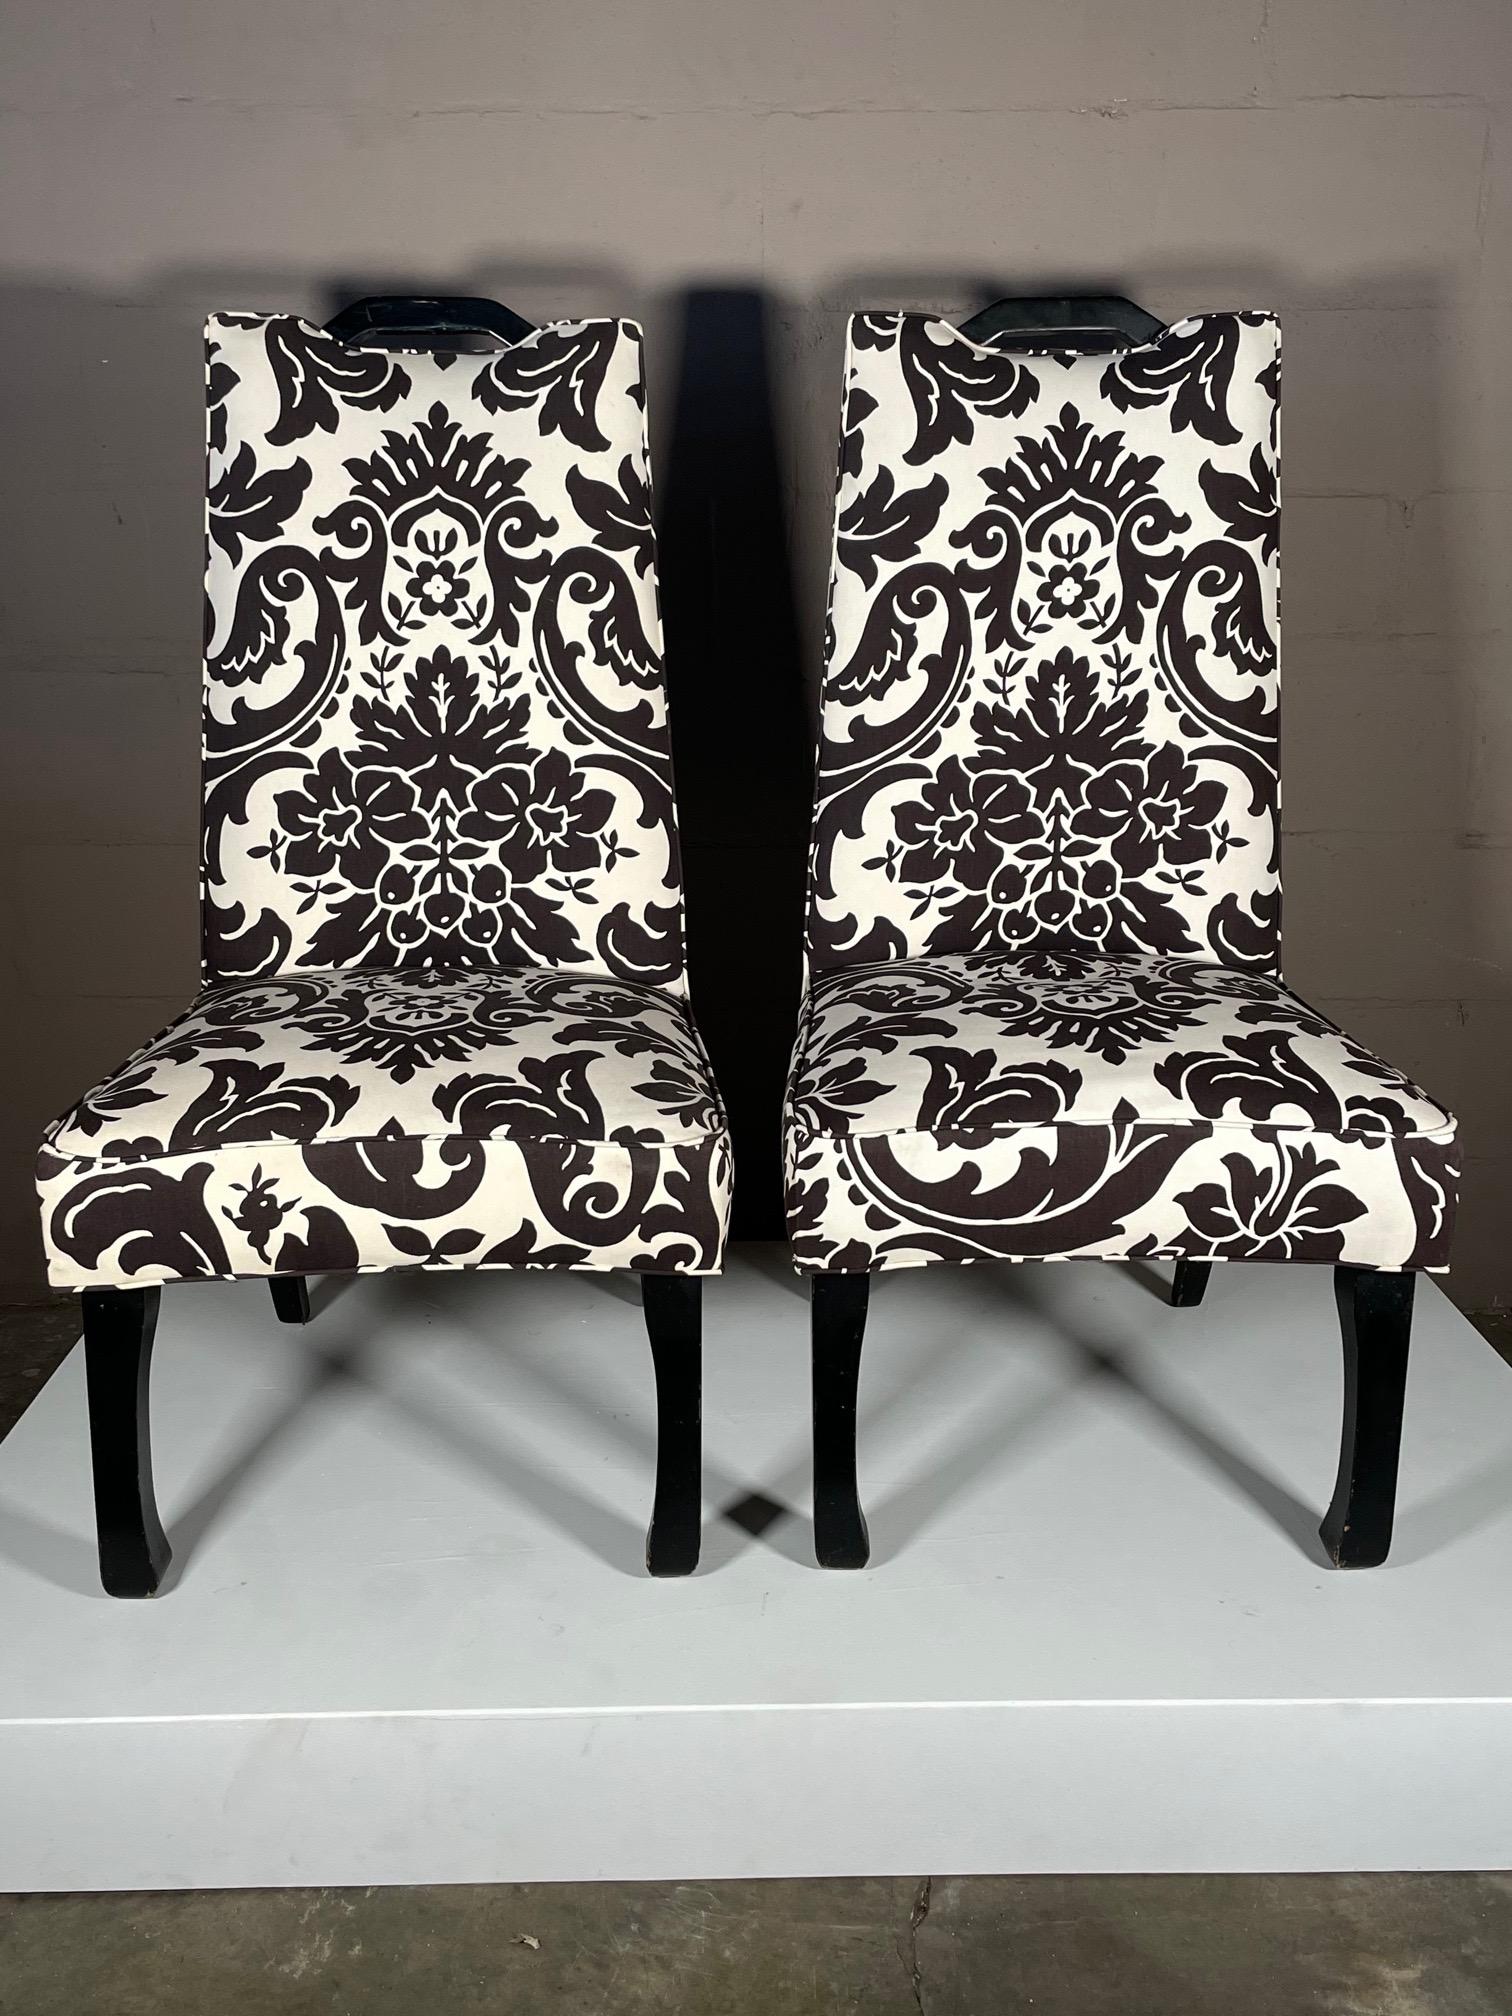 A pair of stylish, asian style, tall back chairs with black laquered handles. Upholstered in cotton, black/white abstract print.